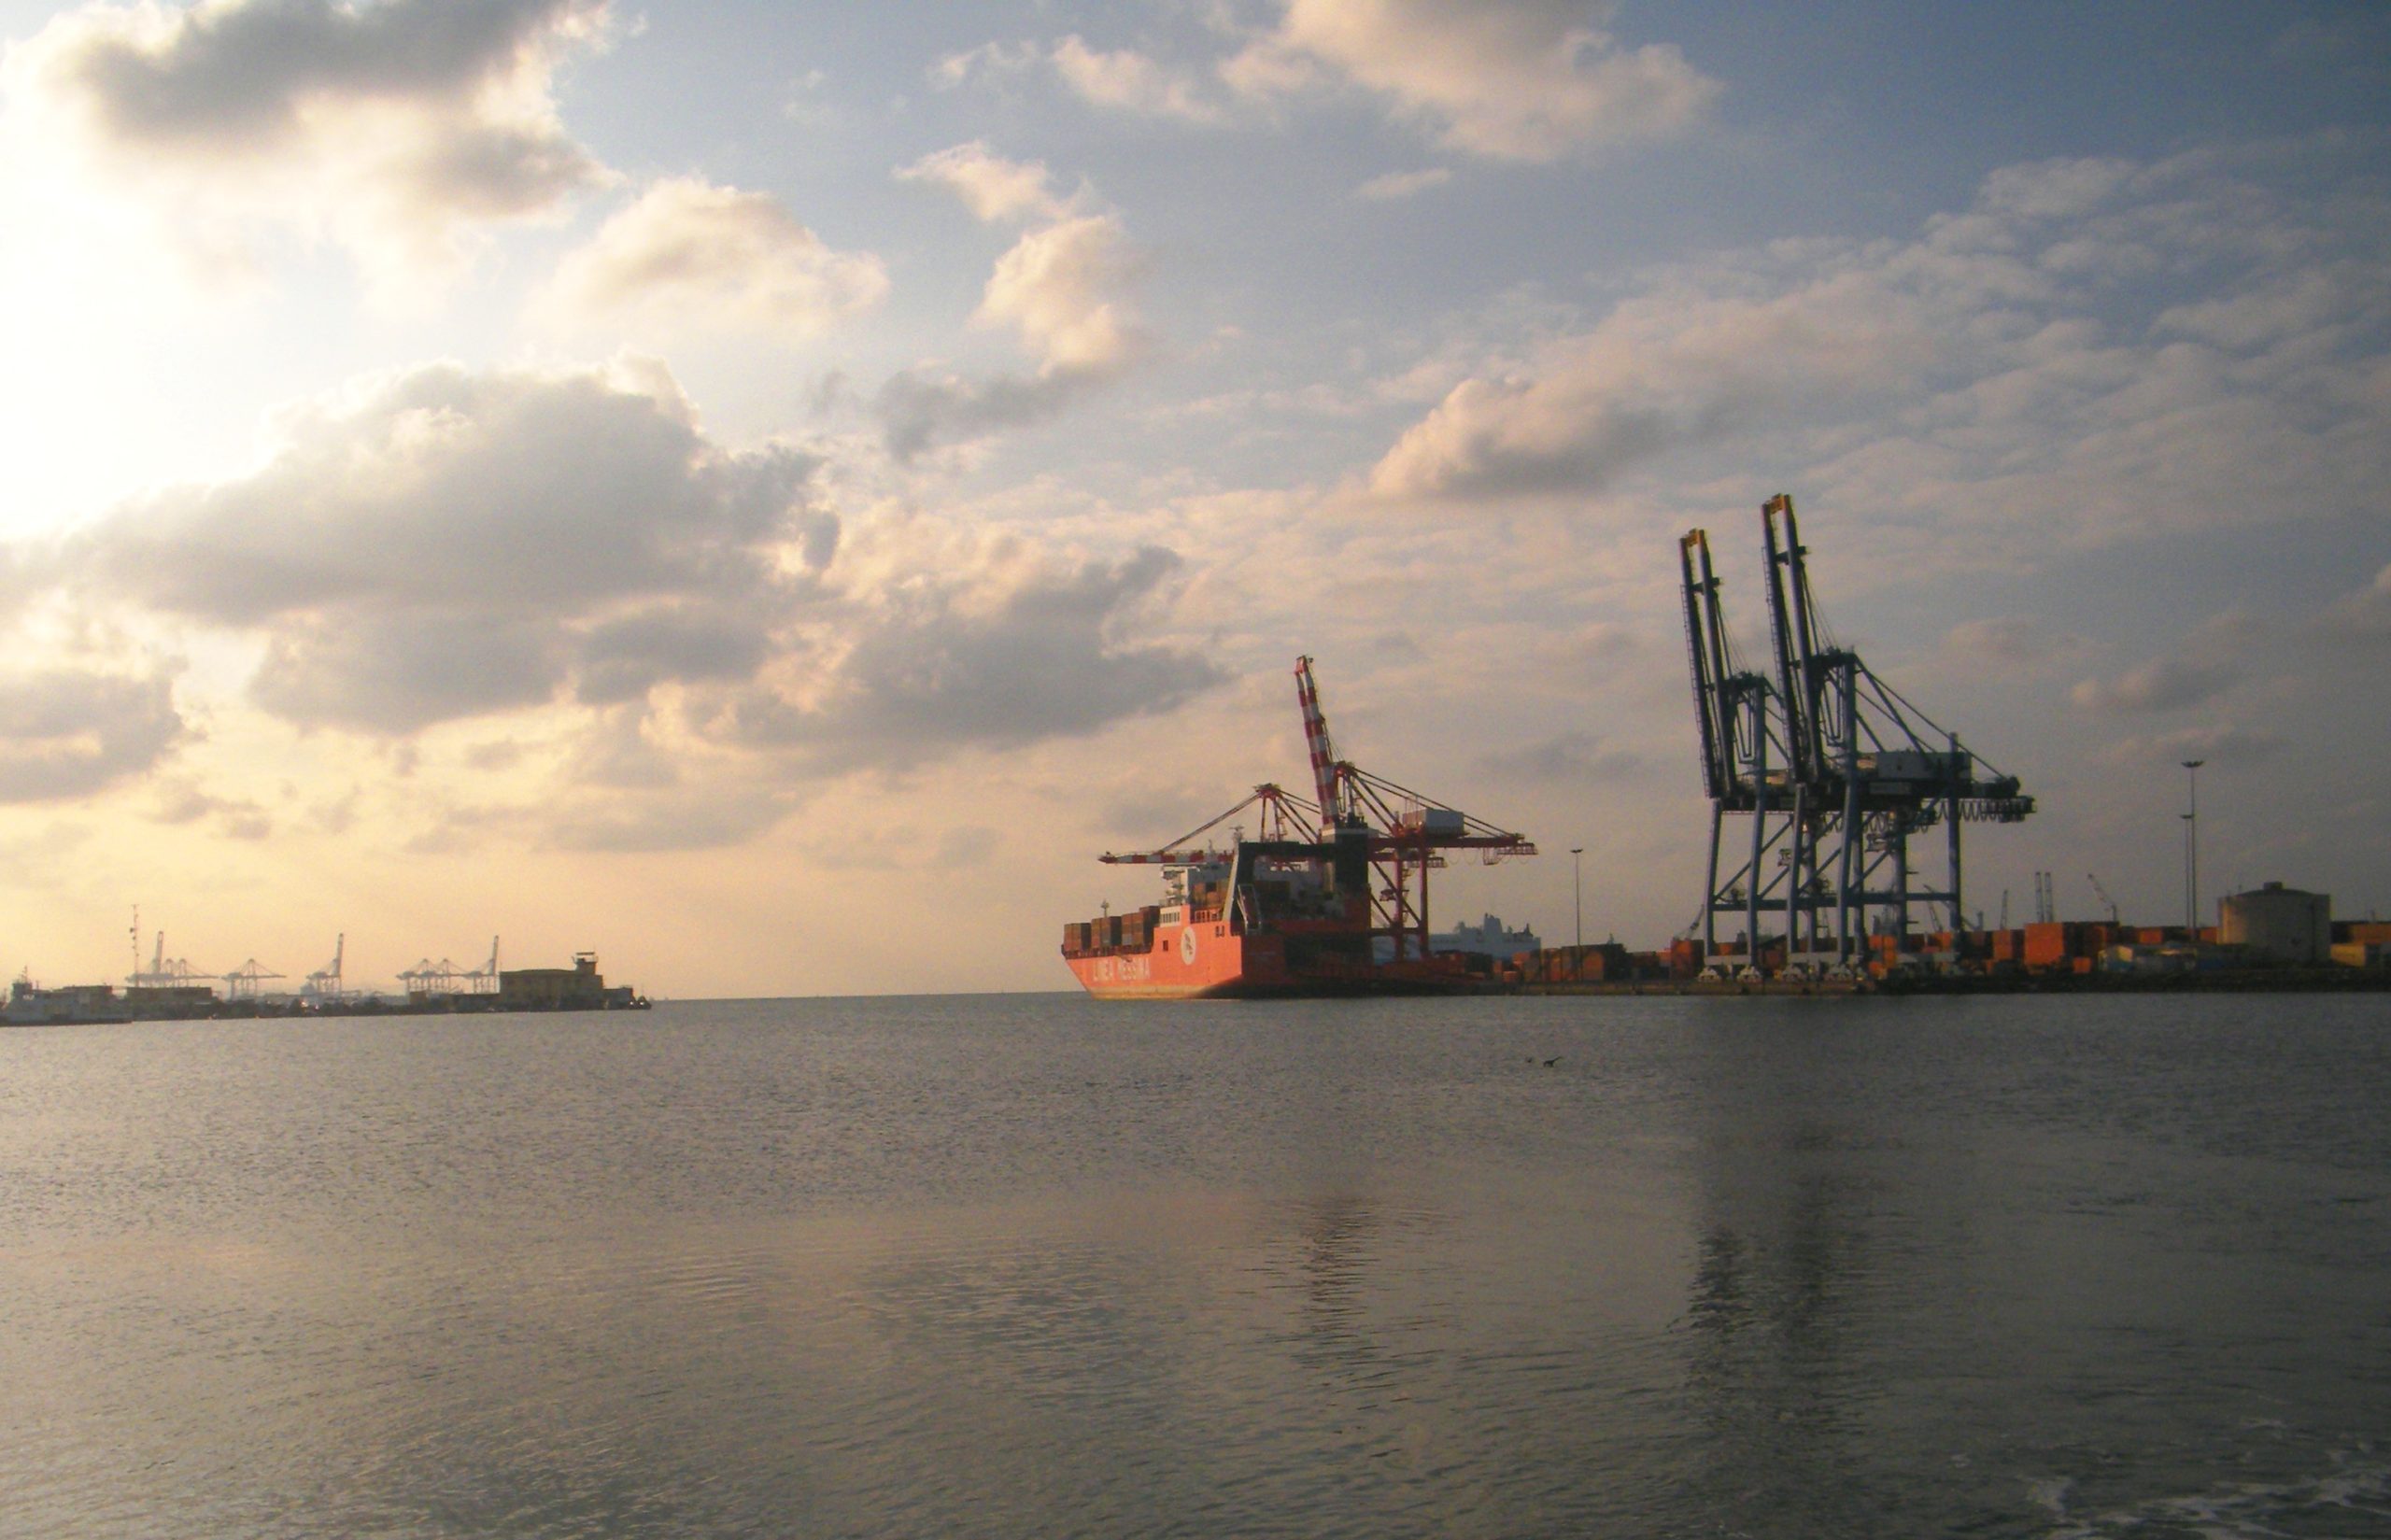 How were Djibouti ports affected by the worsening unrest in the Red Sea?